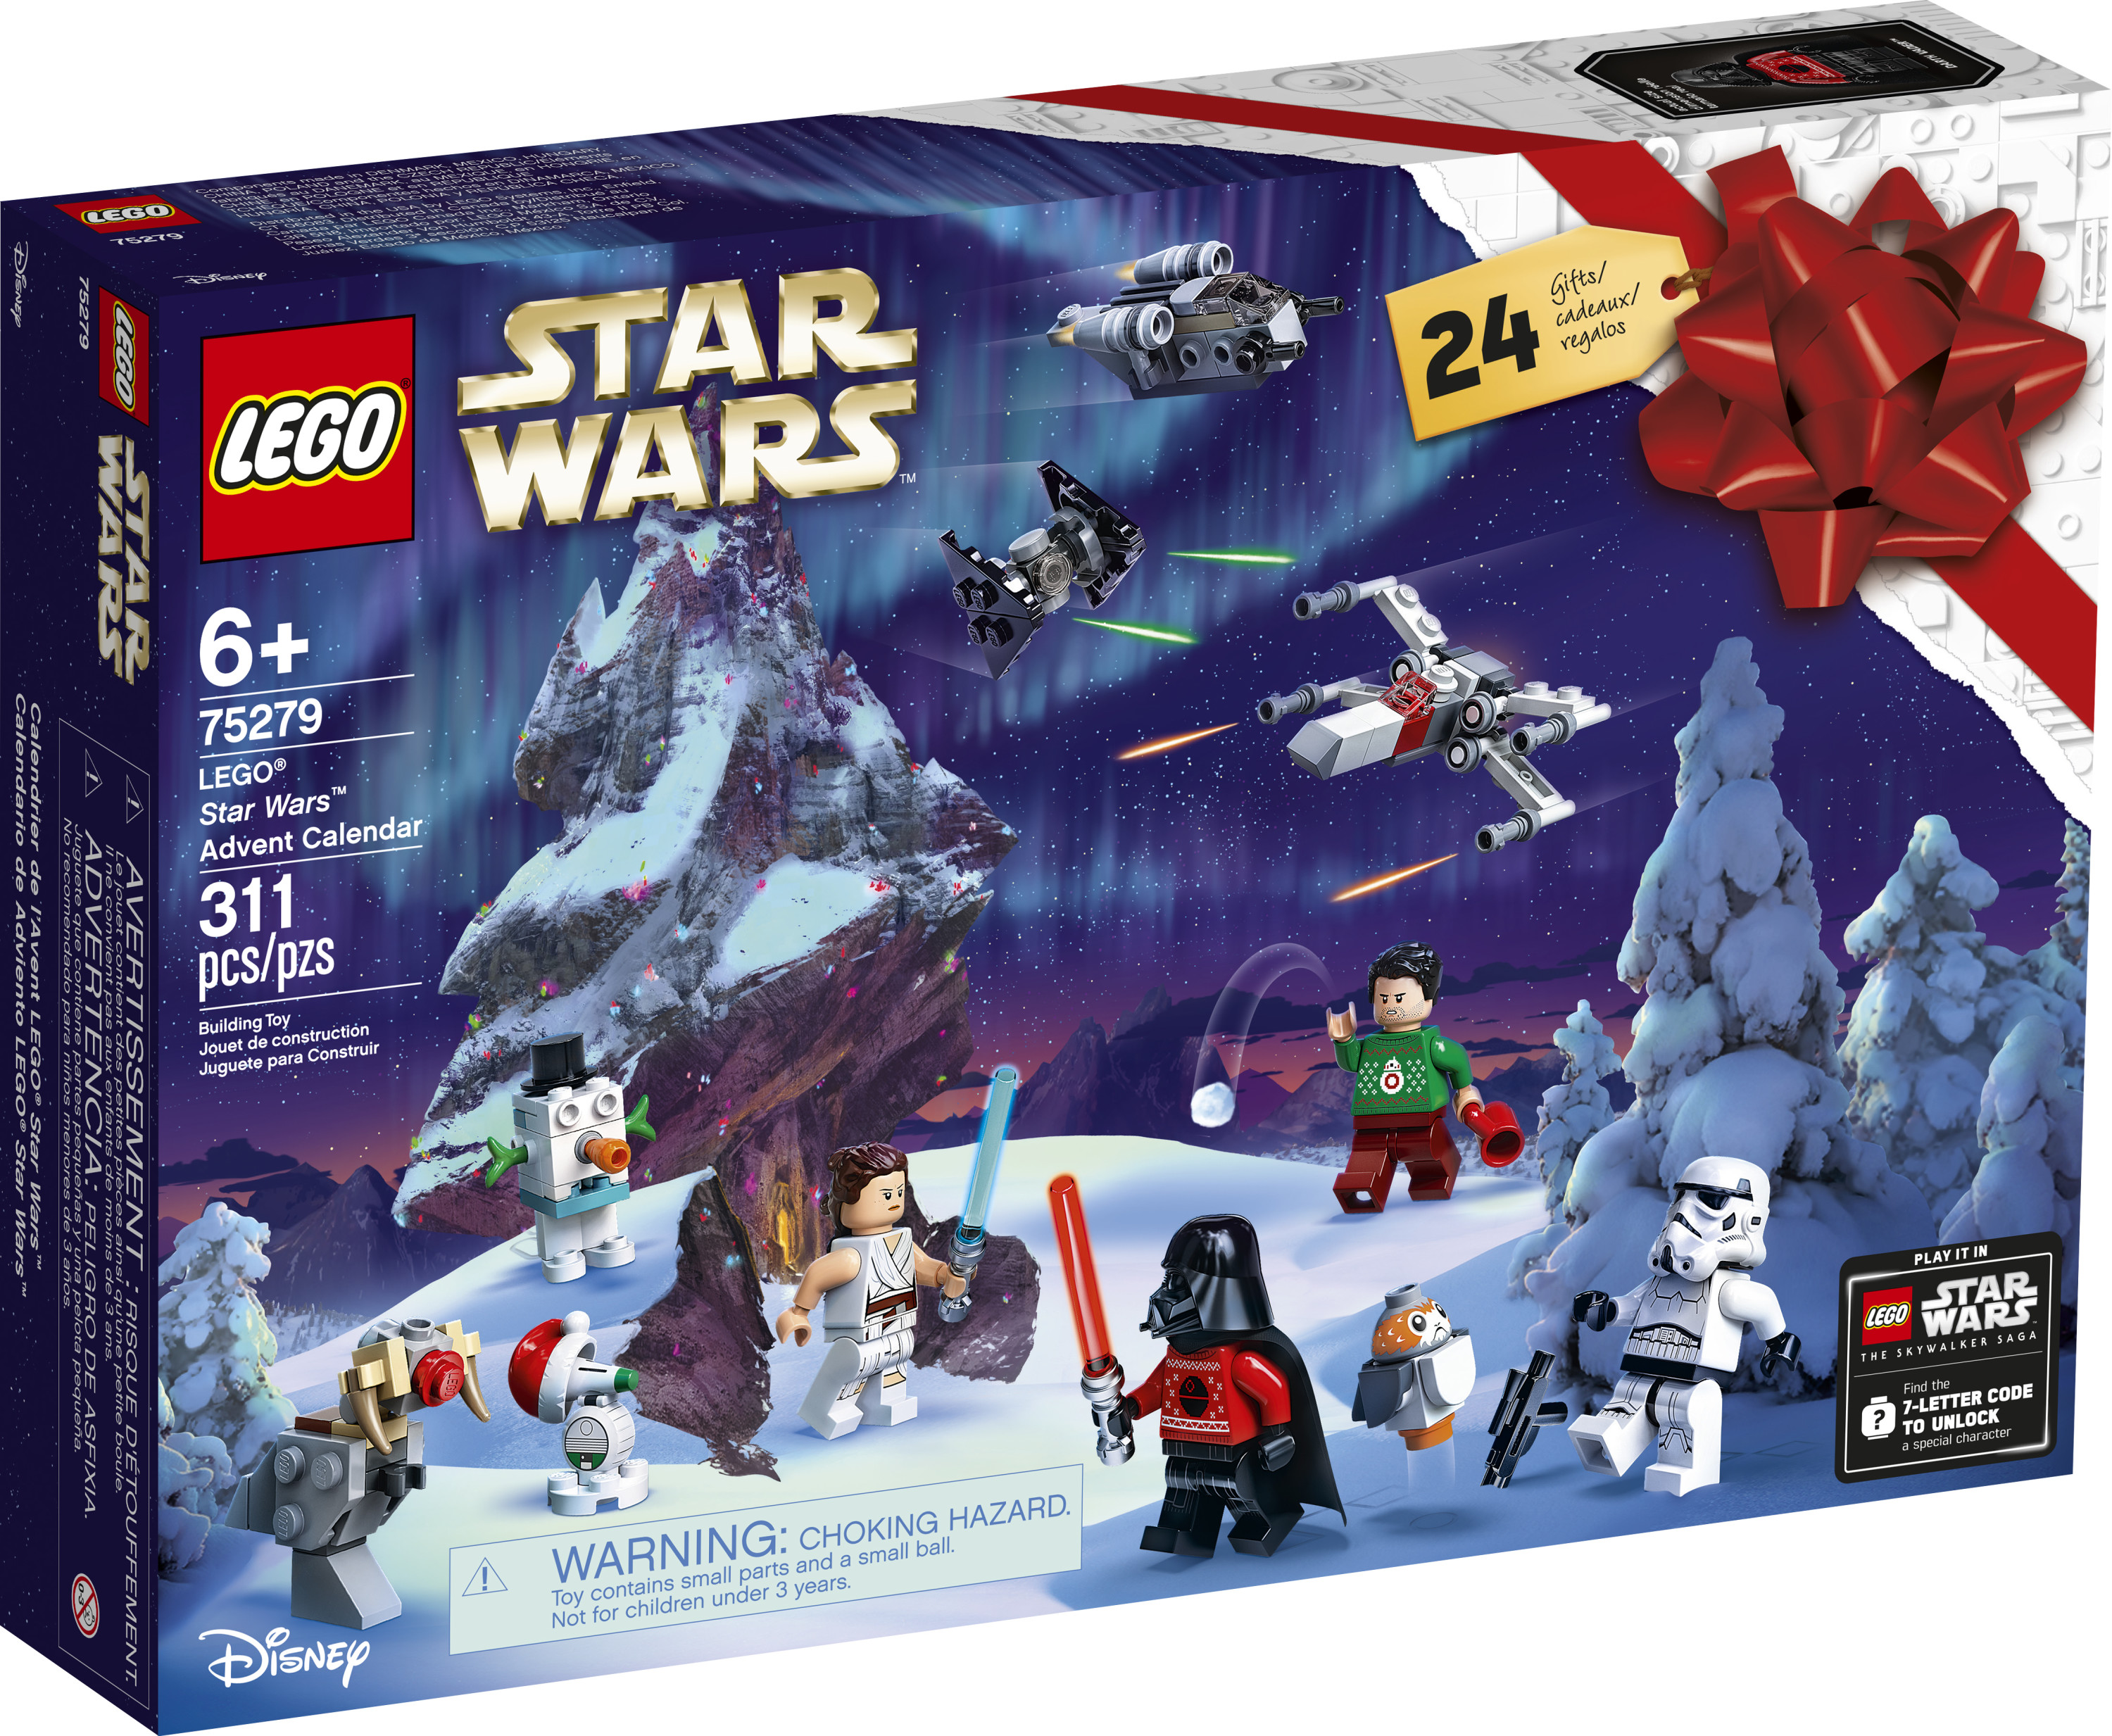 LEGO Star Wars Advent Calendar 75279 Building Kit, Fun Christmas Countdown Calendar with Star Wars Buildable Toys (311 Pieces) - image 4 of 7